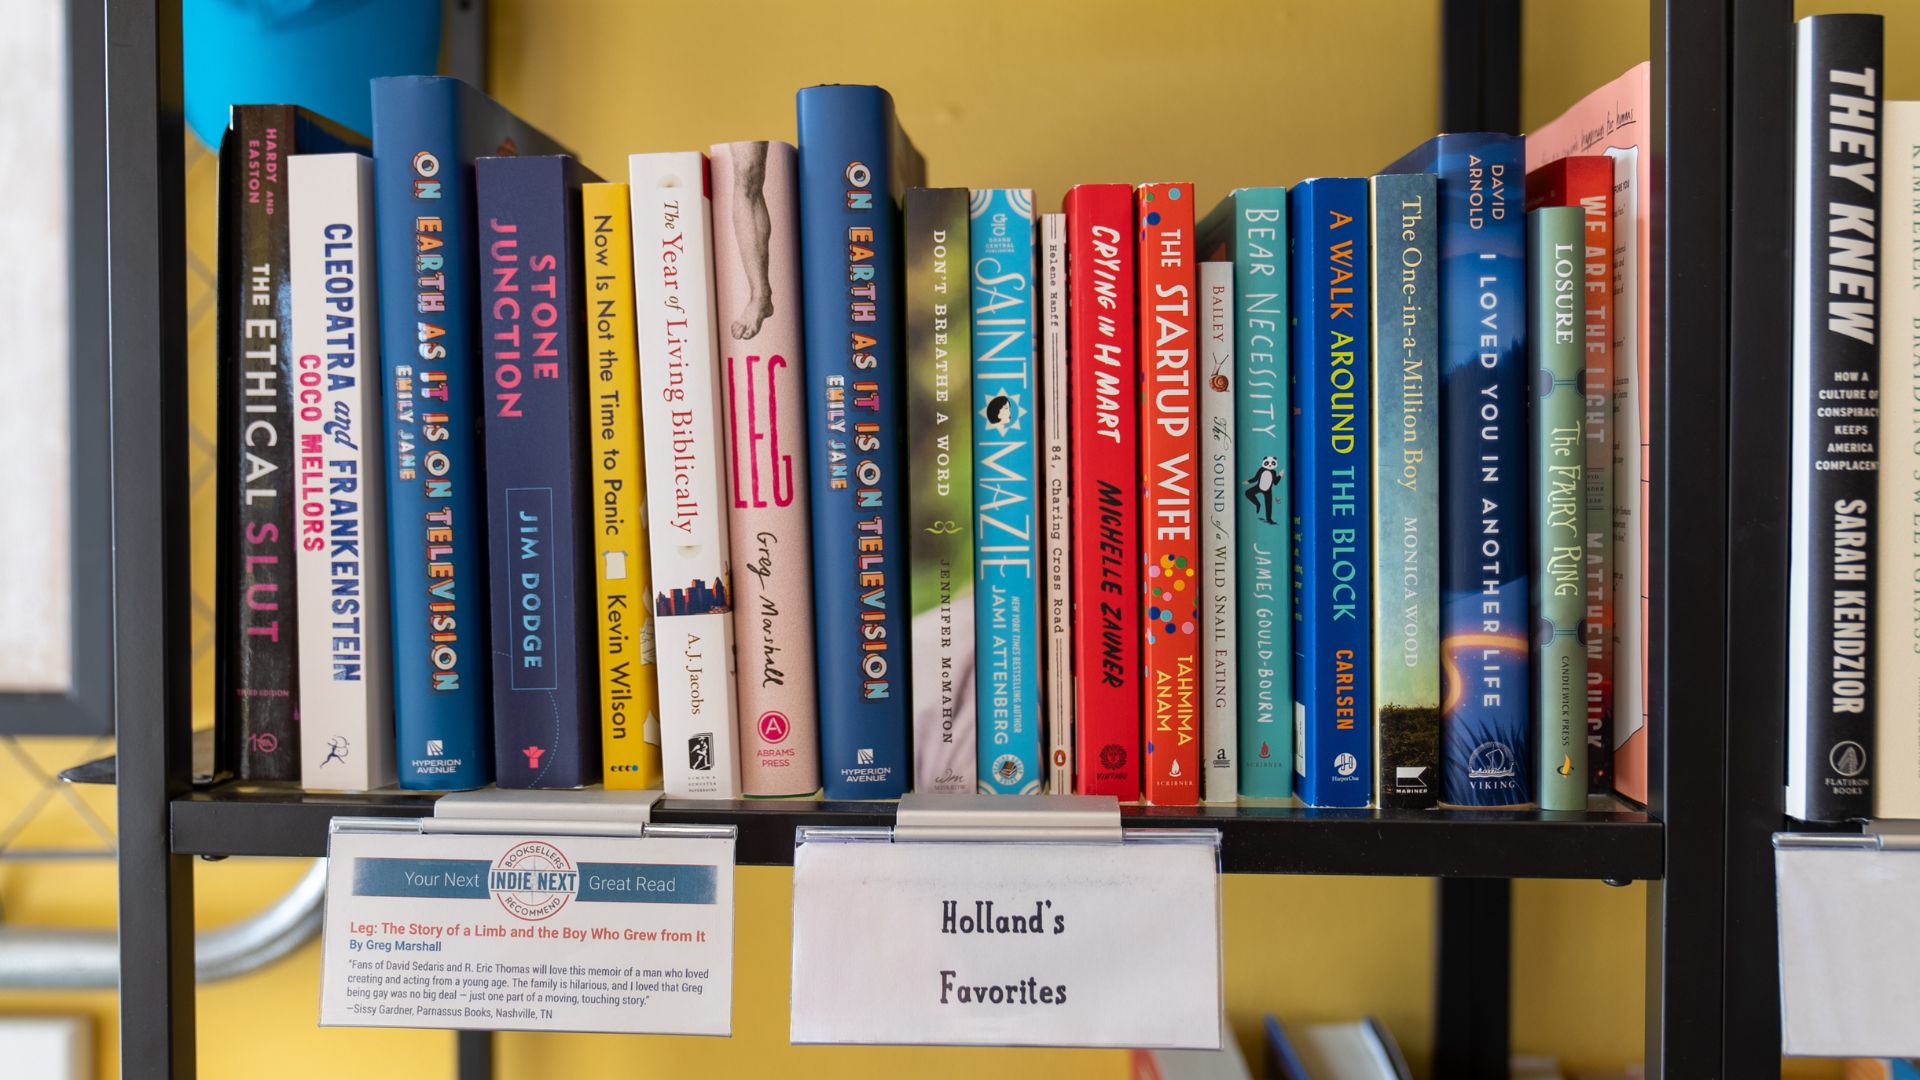 The owner of The Novel Neighbor has a shelf of her book recommendations.